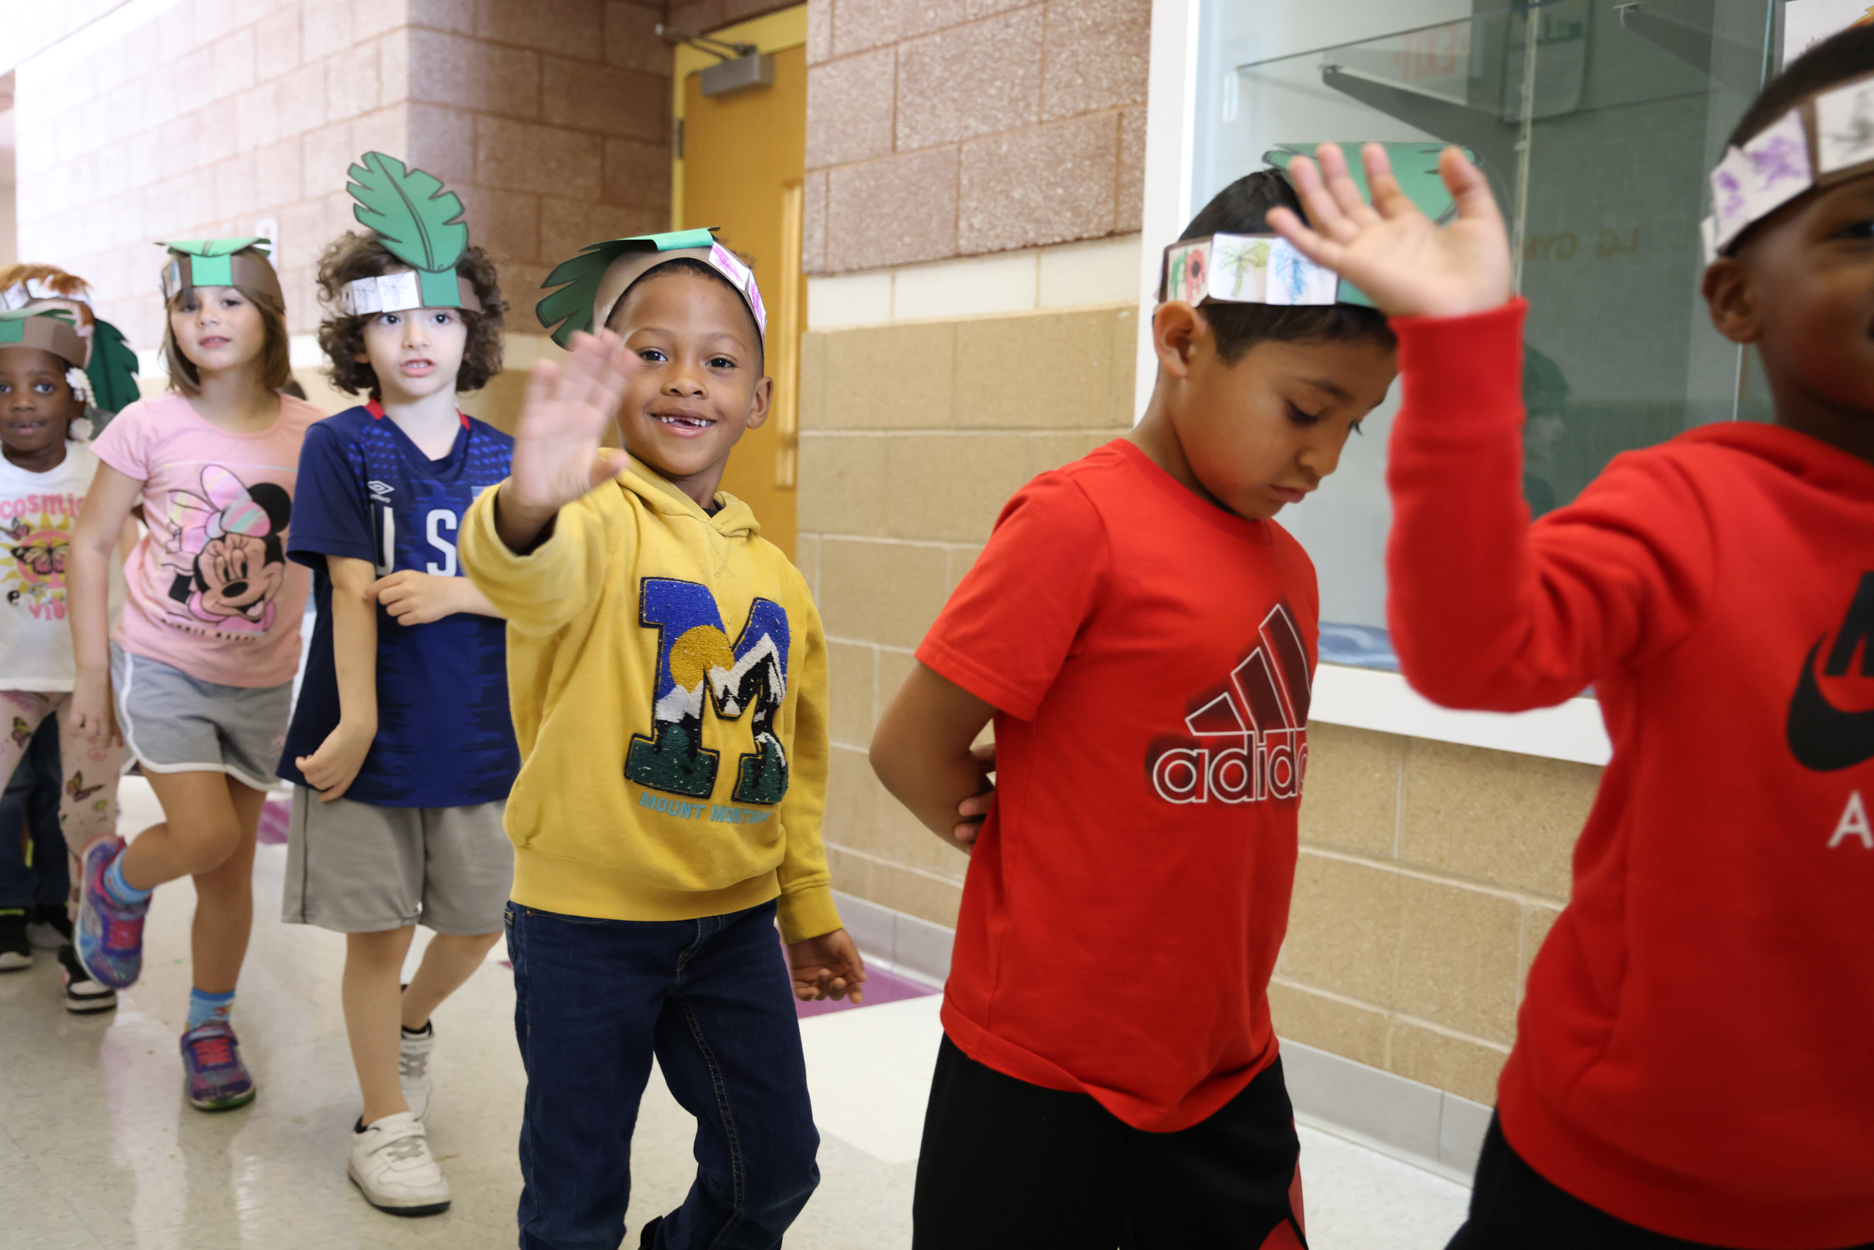 Kindergarten students walk down the halls of a school while one of them waves